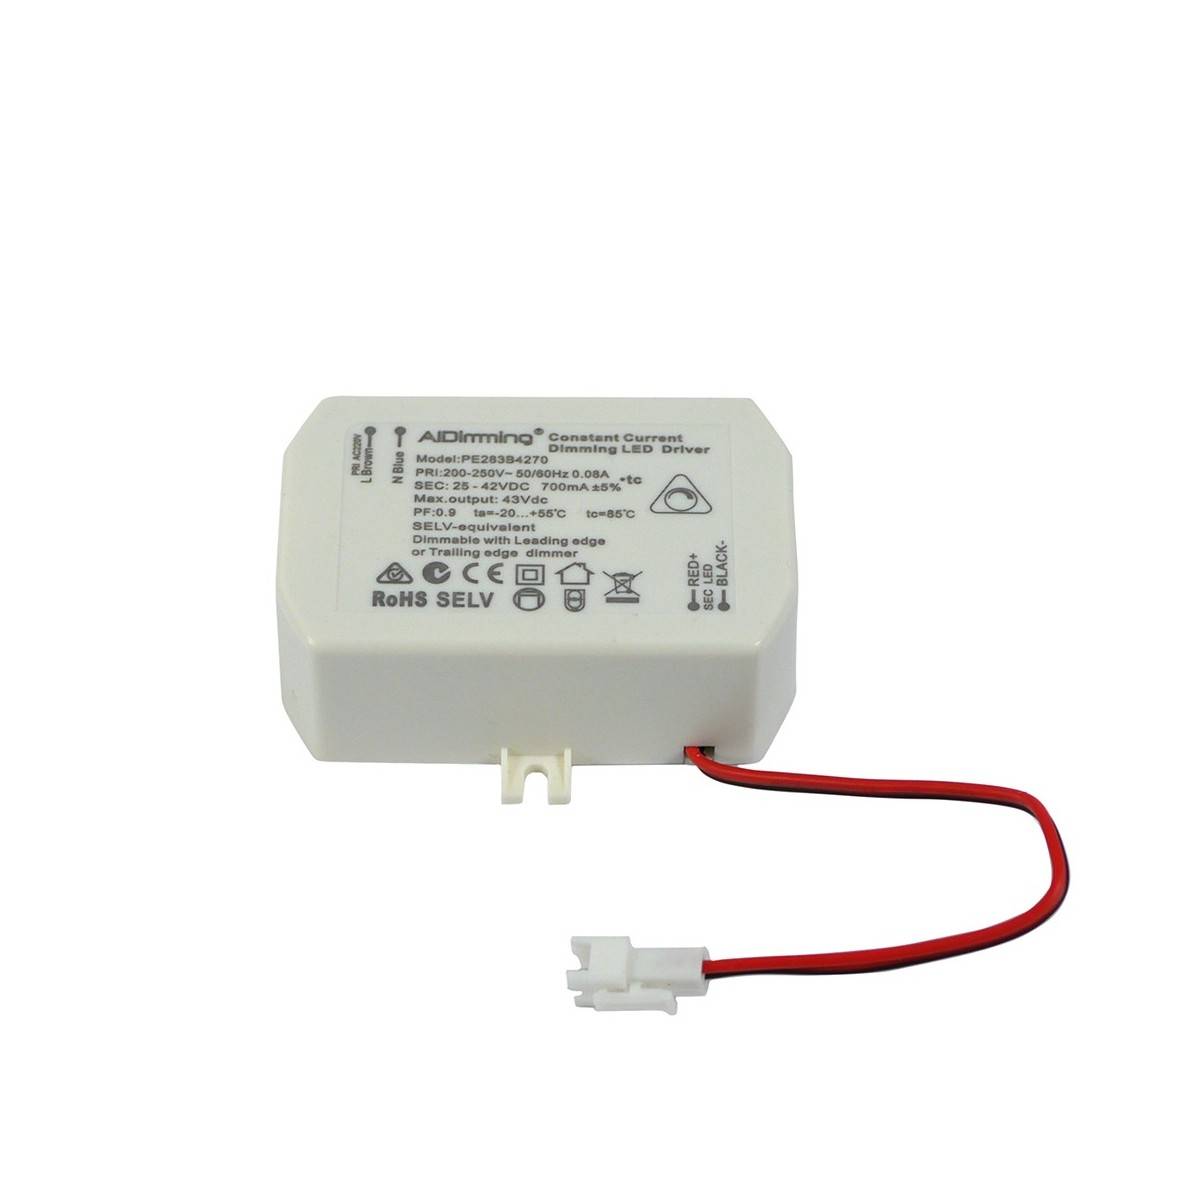 Dimmable constant current driver 25-42VDC 700mA